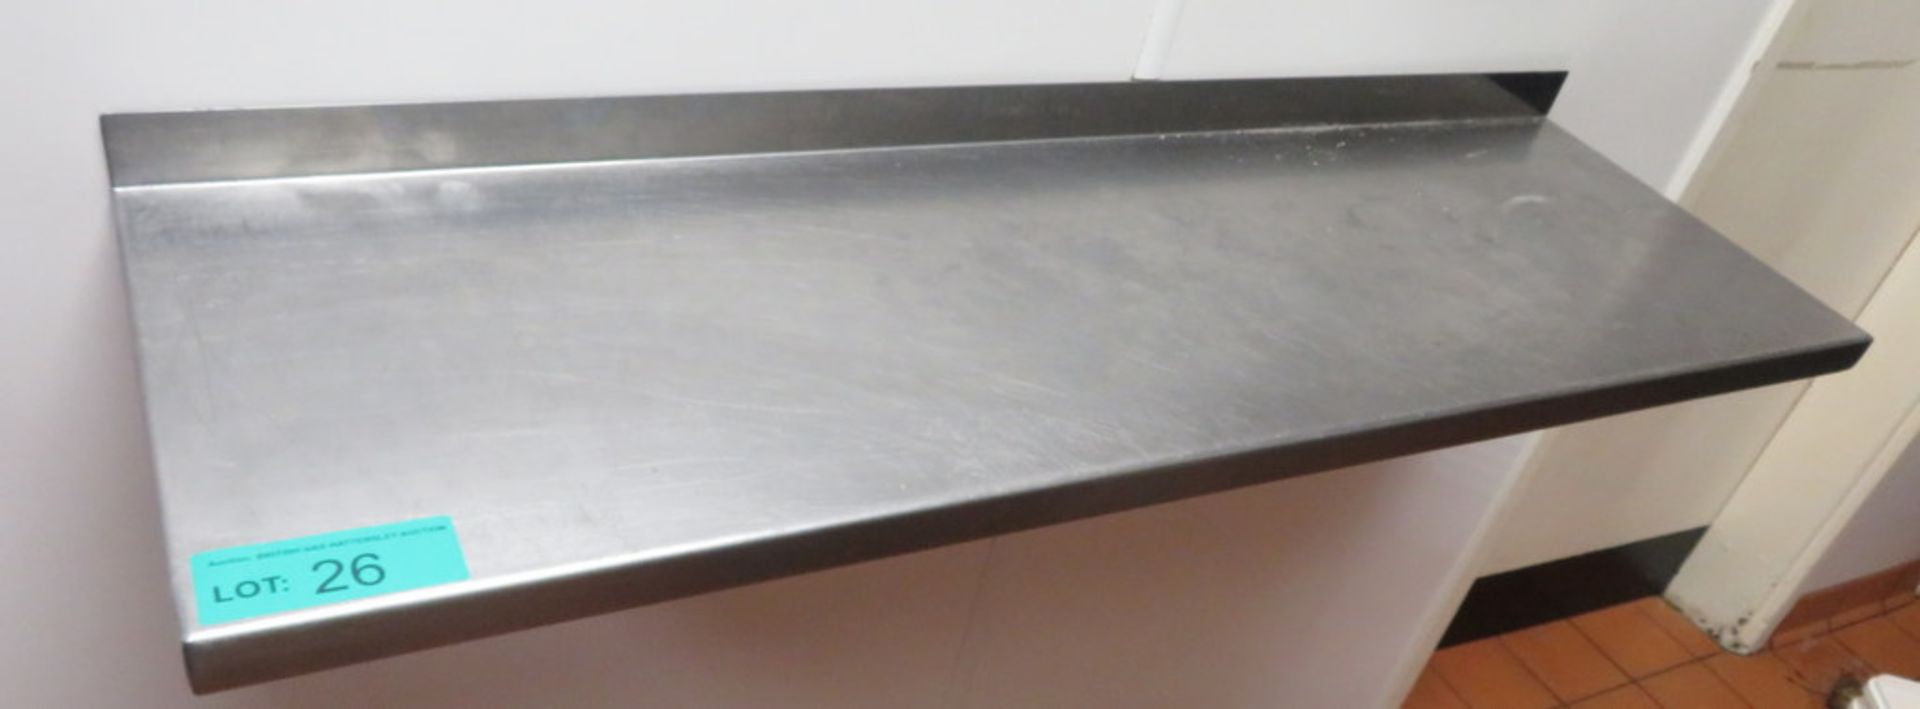 3x Stainless Steel Kitchen Shelves. - Image 3 of 5